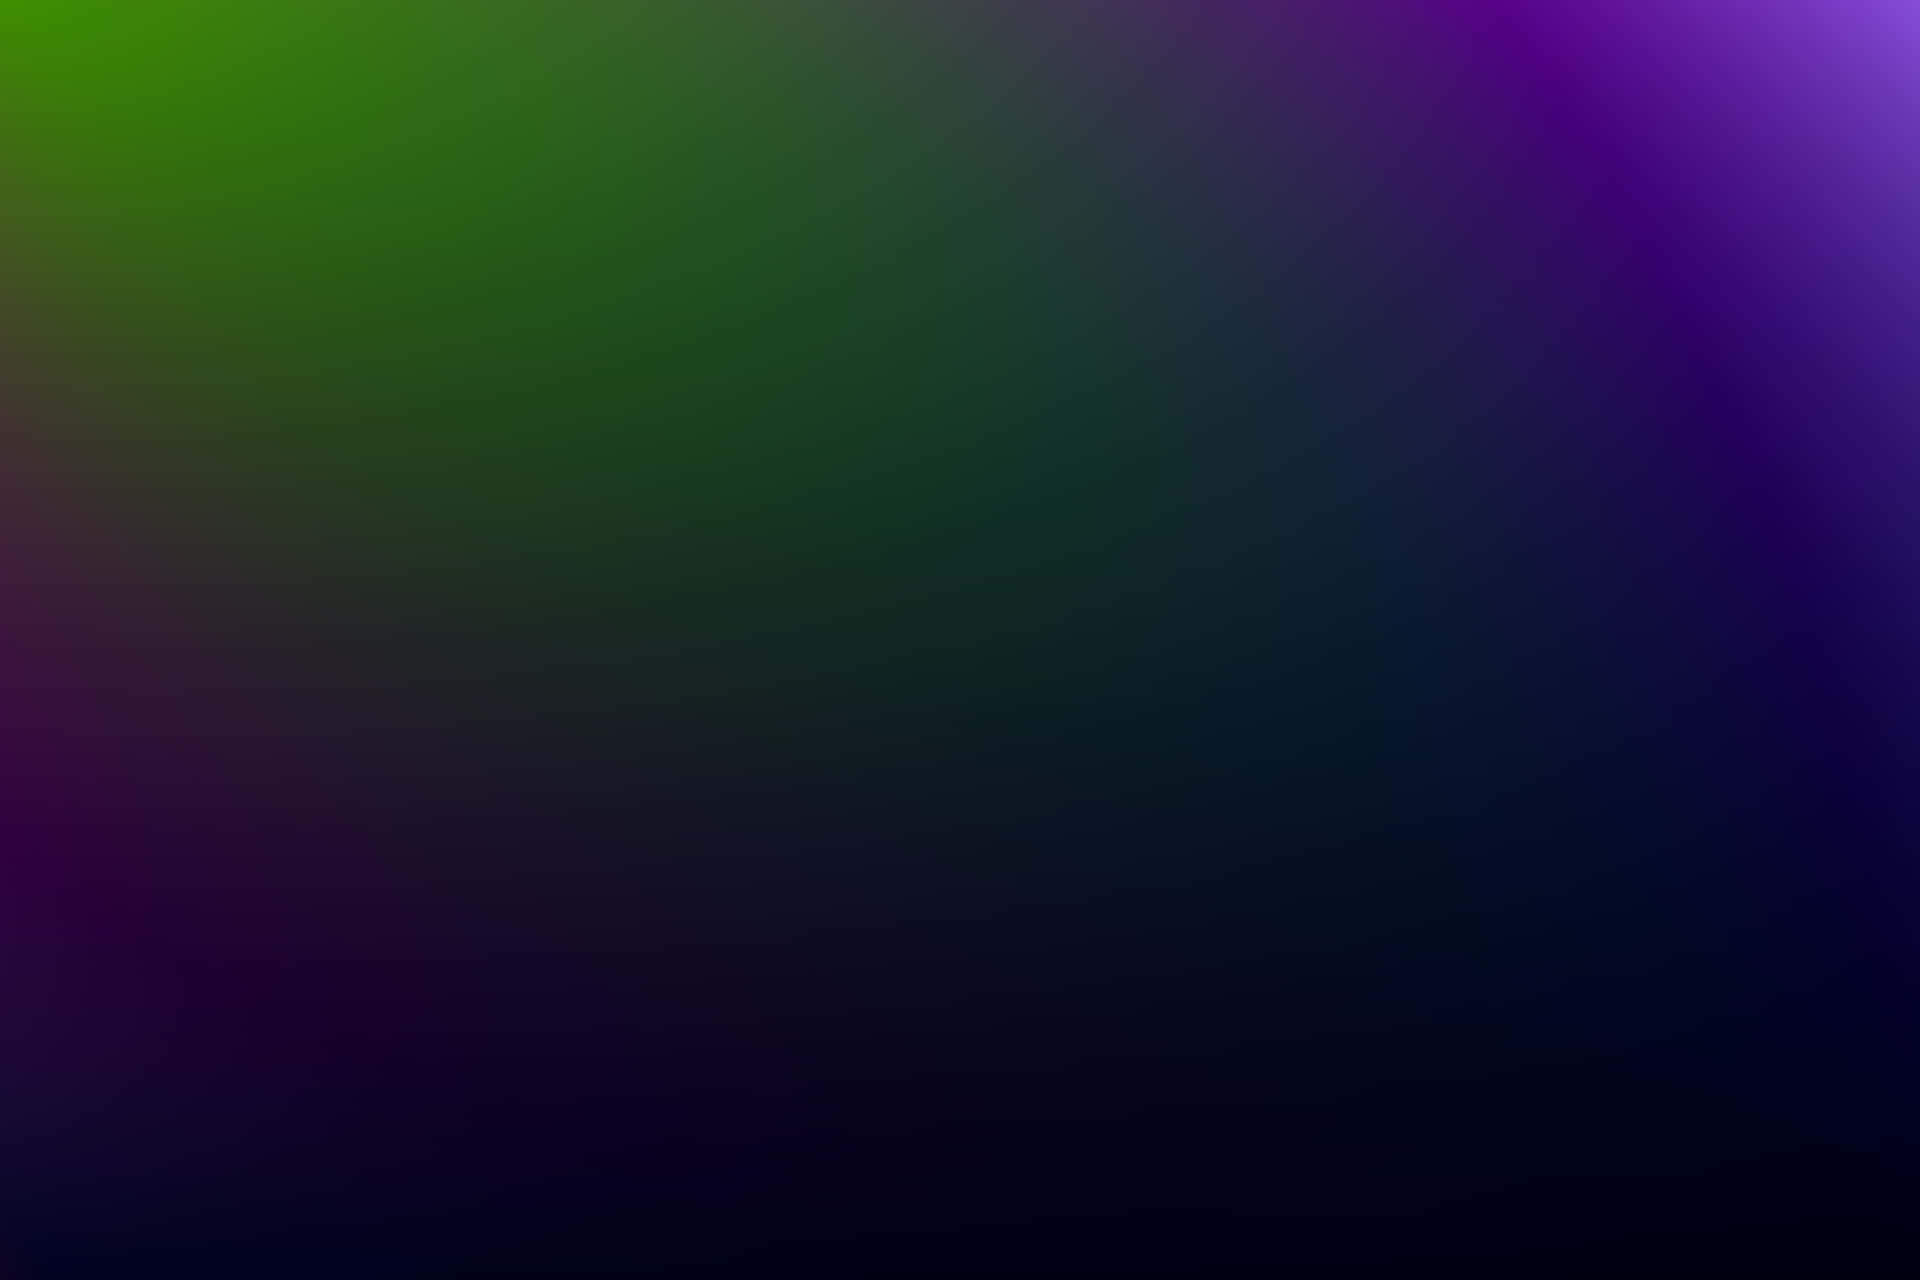 A beautiful abstract background featuring the colors purple and green